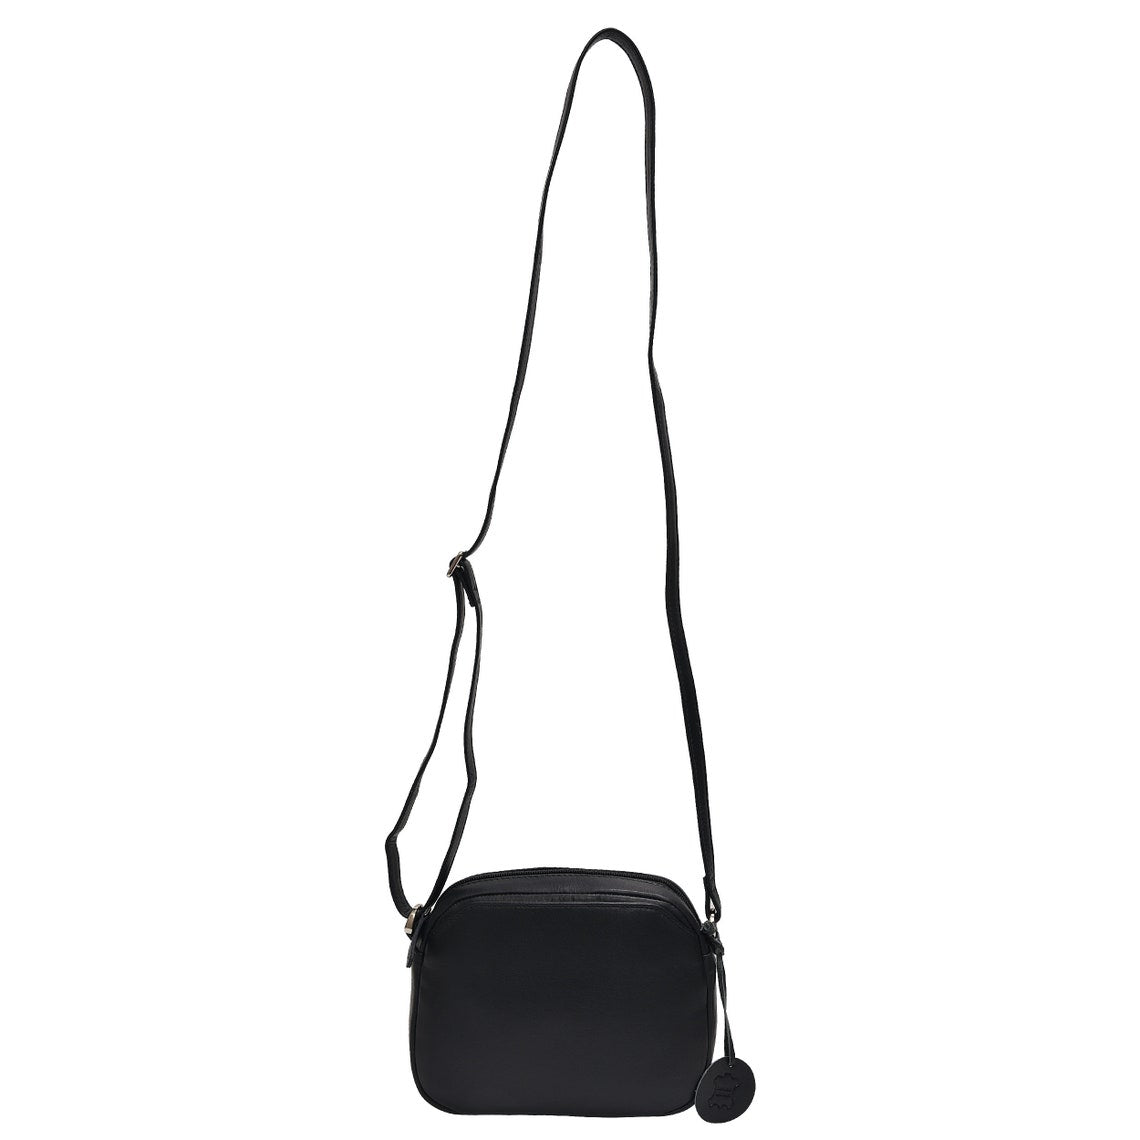 GT-H92: G&T Full-grain Leather Small Ladies' Crossbody Bag with Long Adjustable Strap